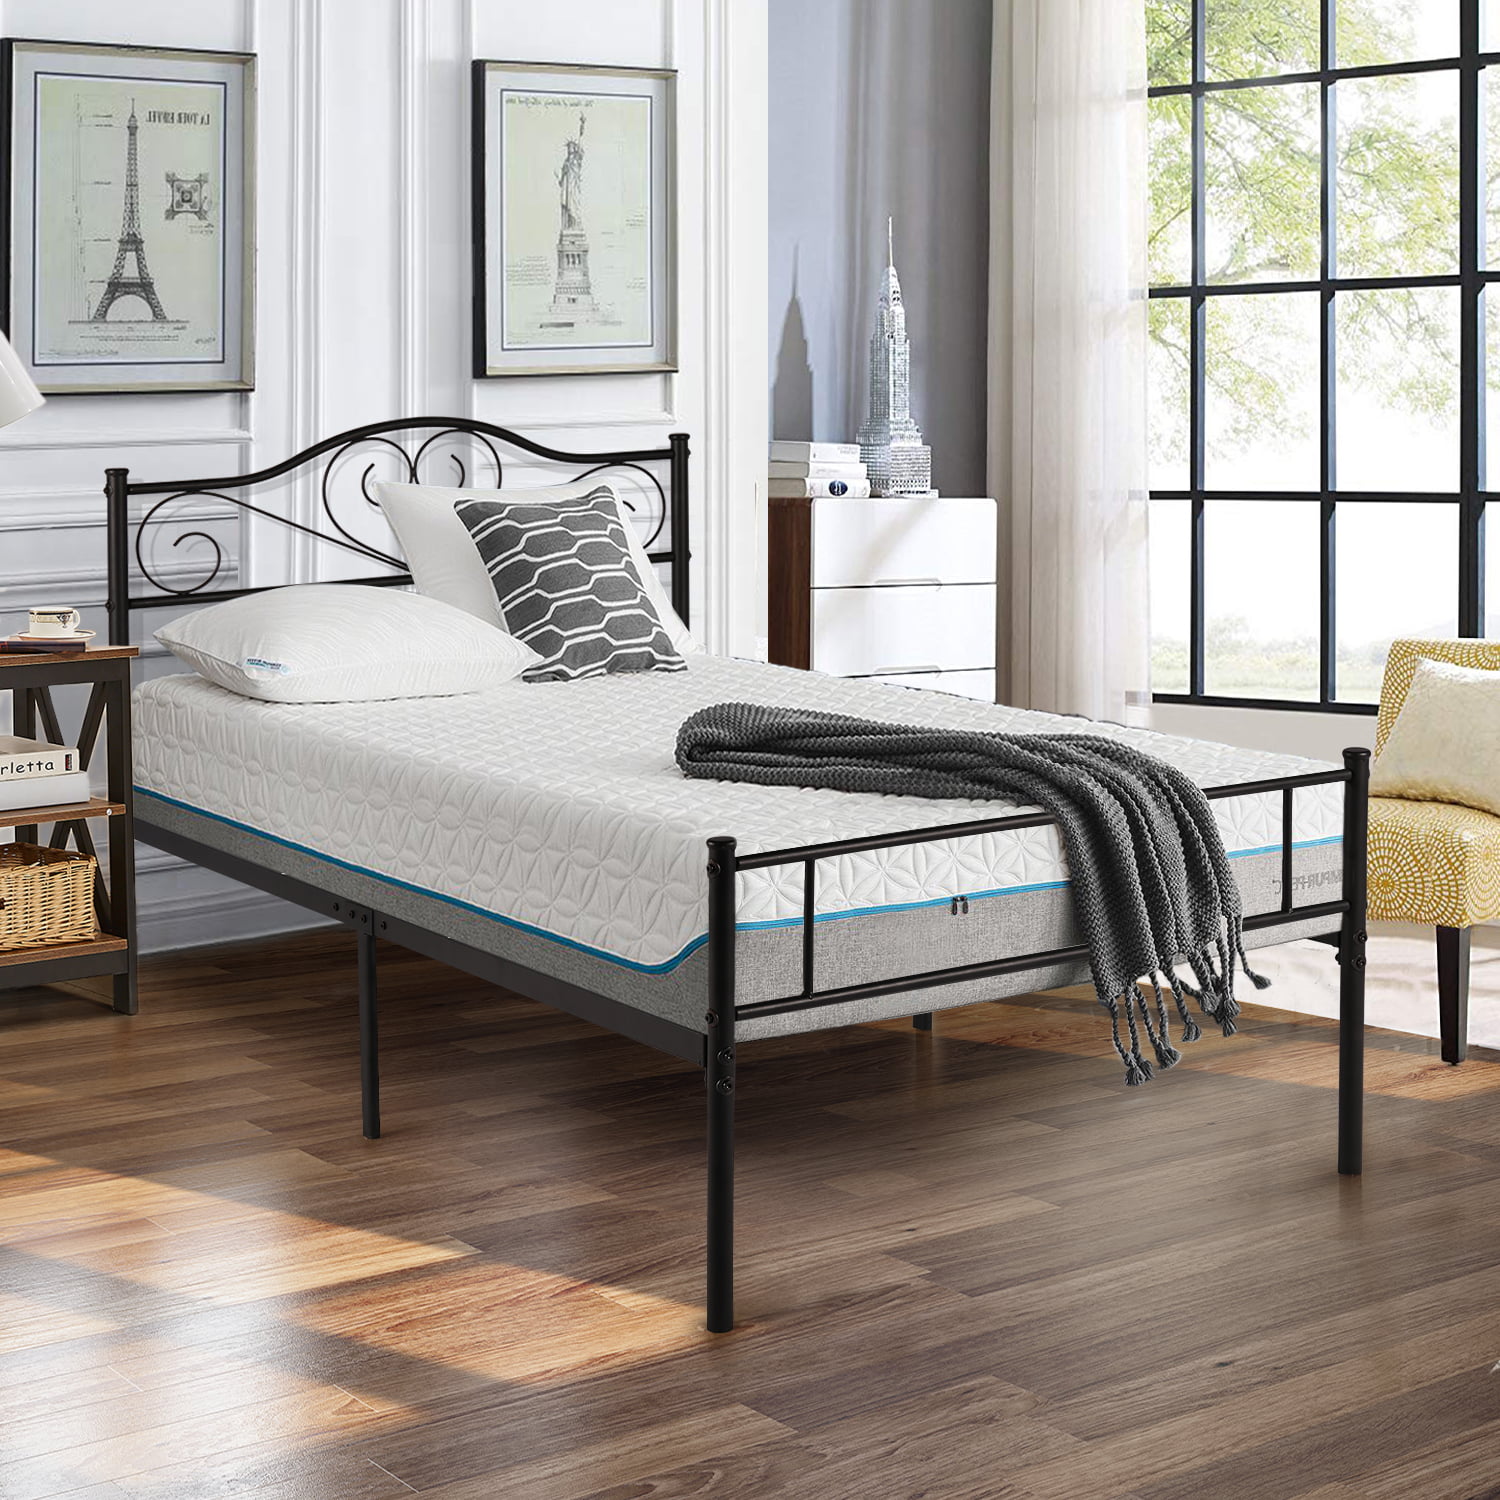 VECELO Twin Size Metal Bed Frame With Headboard Platform Bed Frame,Non